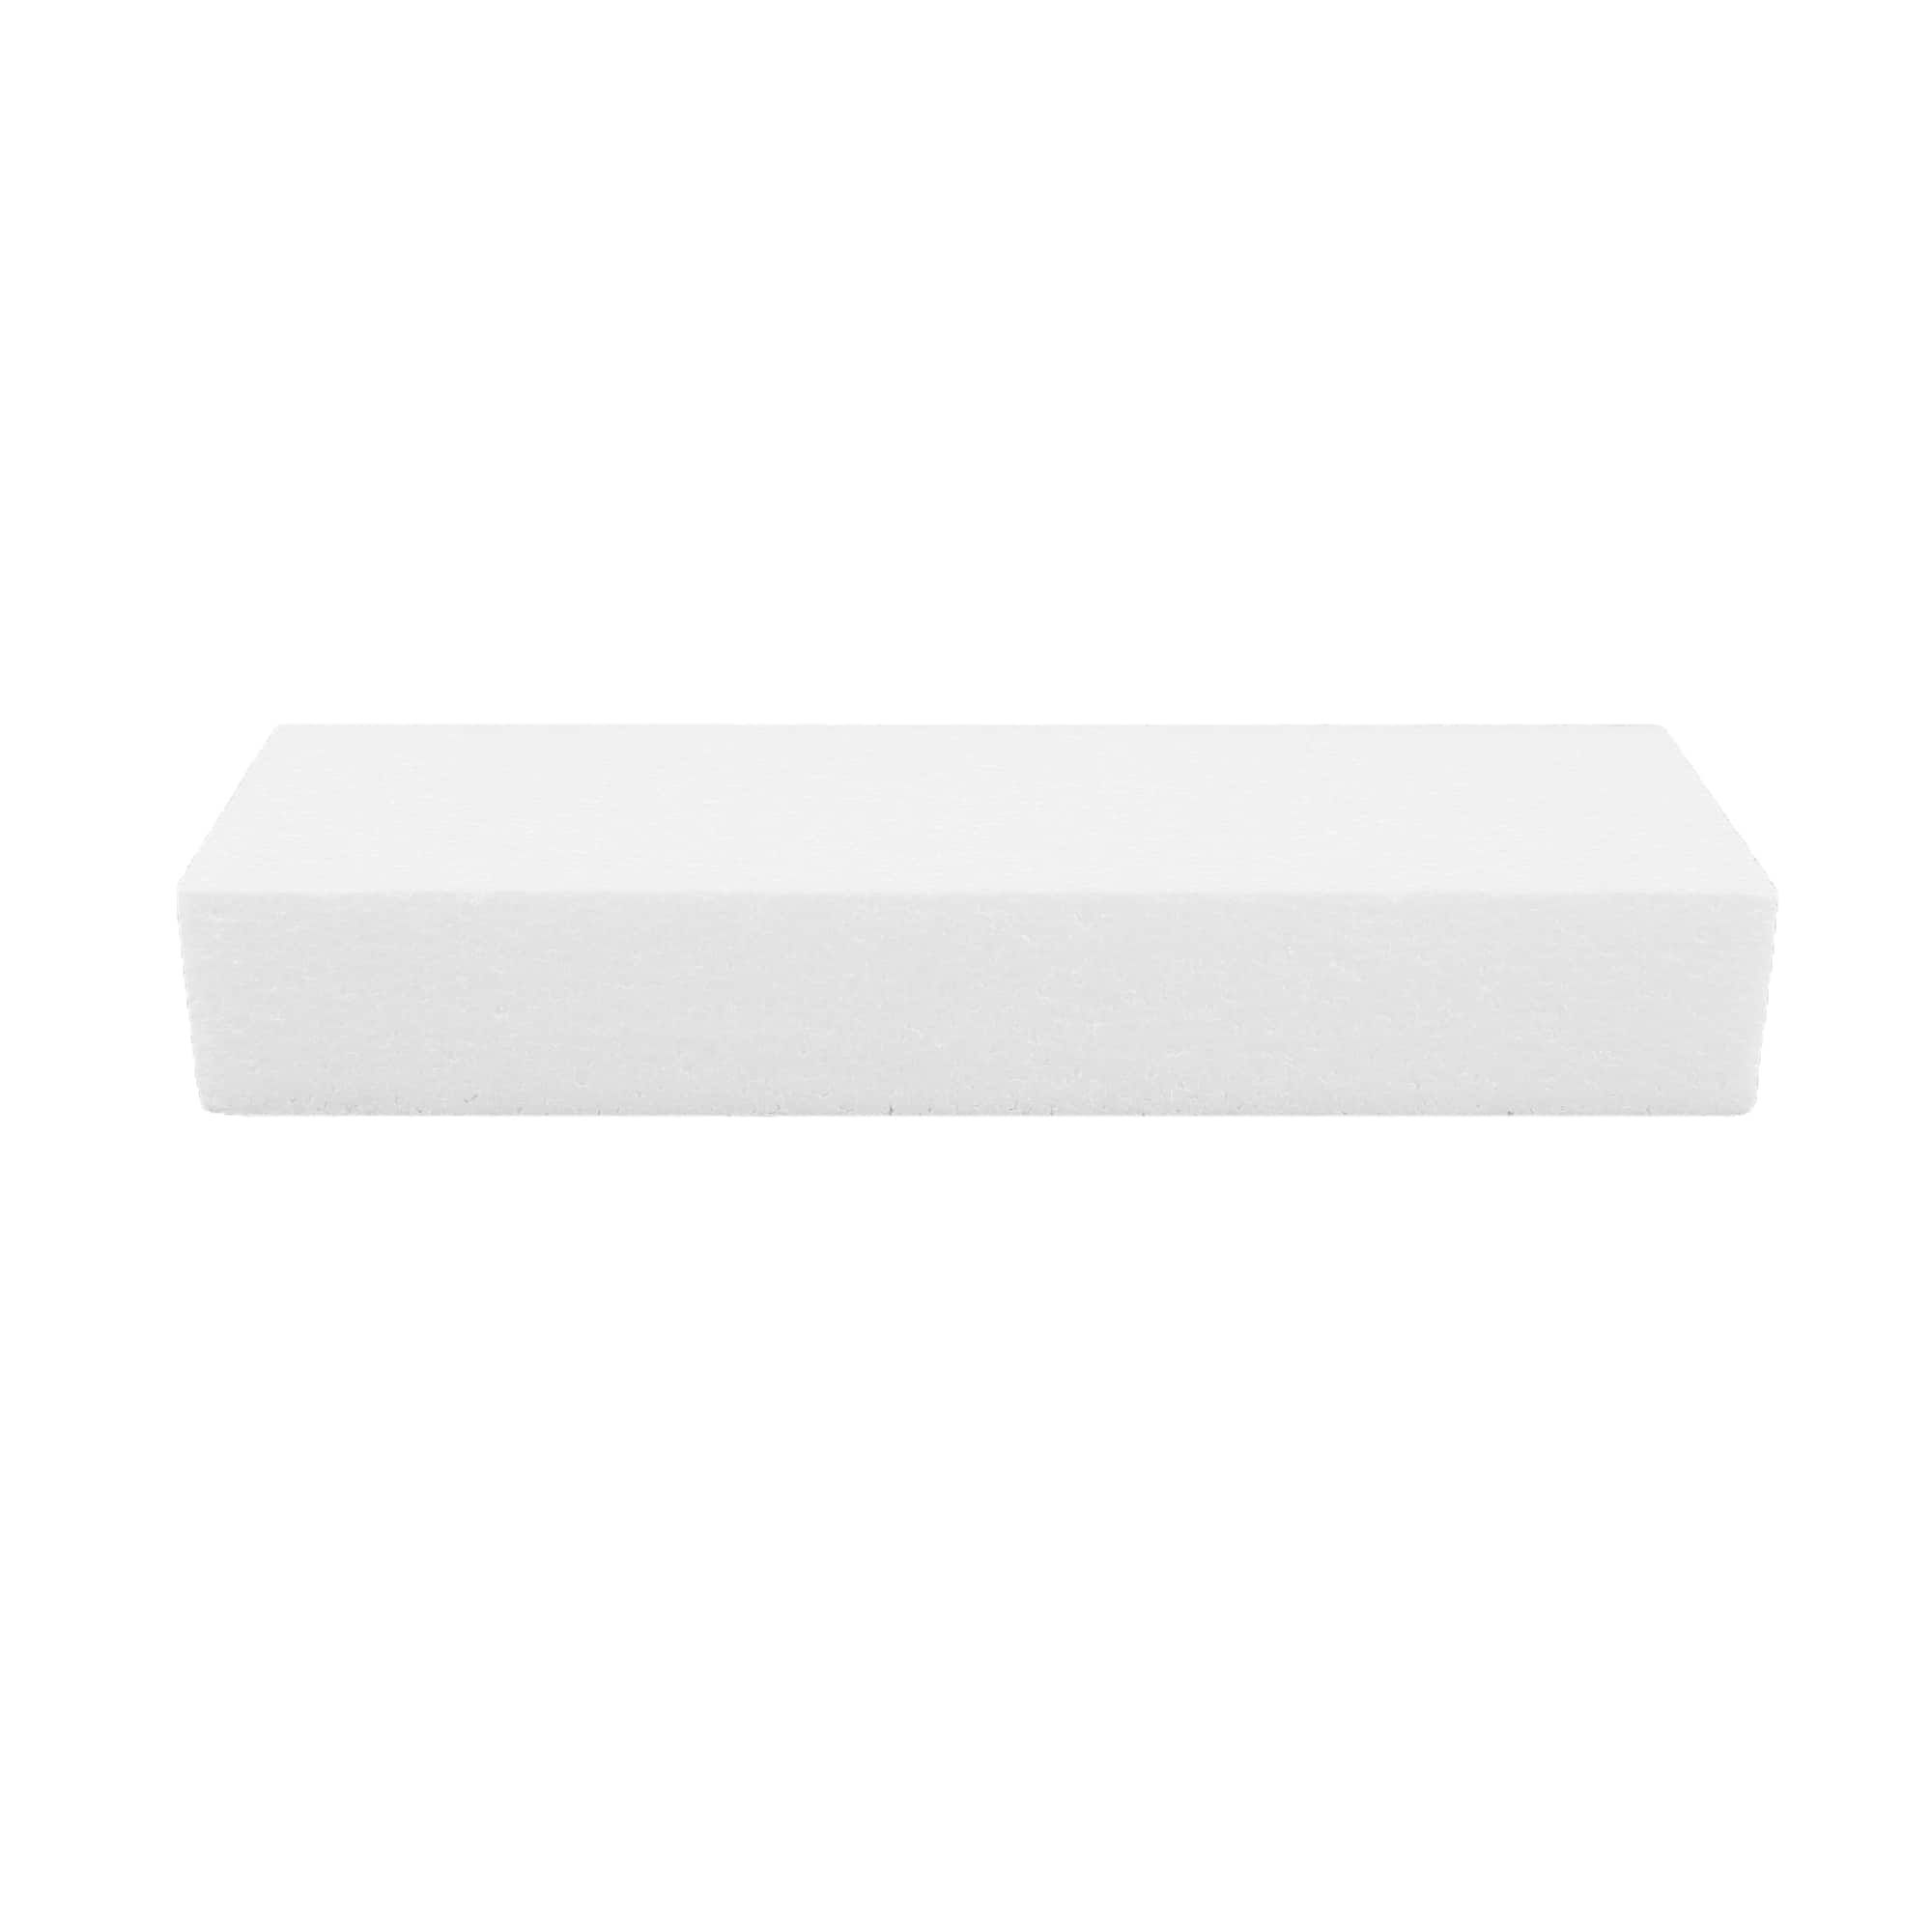 White Foam Blocks for Arts and Craft Supplies (8 x 4 x 1 in, 12 Pack), PACK  - Kroger